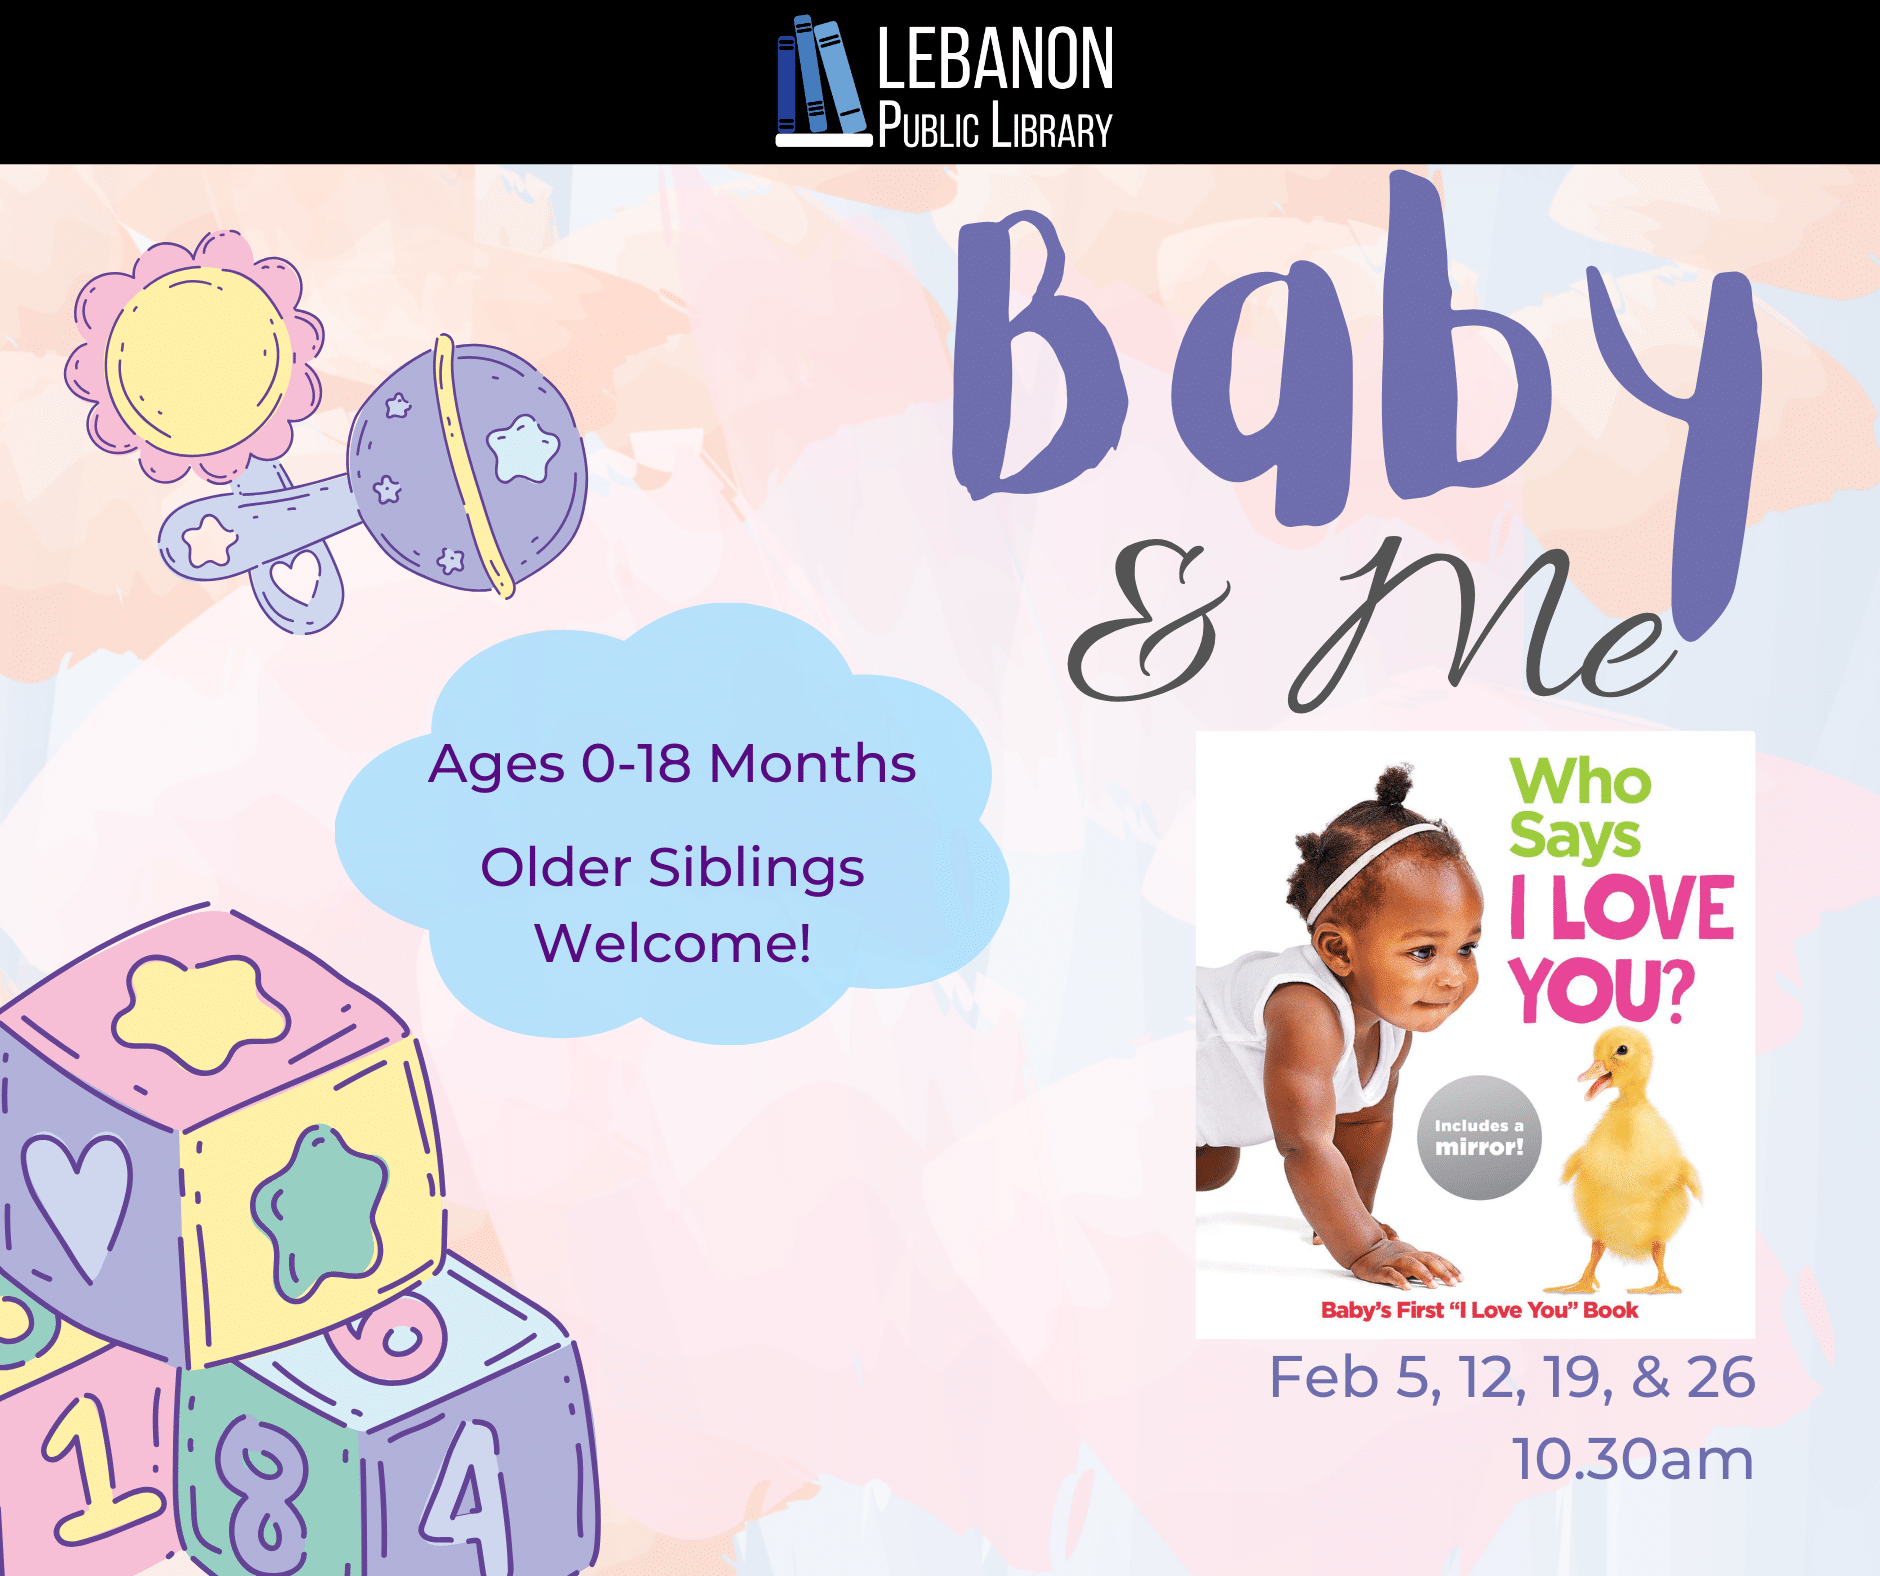 Baby and Me, February 5th, 12th, 19th and 26th at 10:30 a.m. Ages 0-18 months, older siblings welcome.